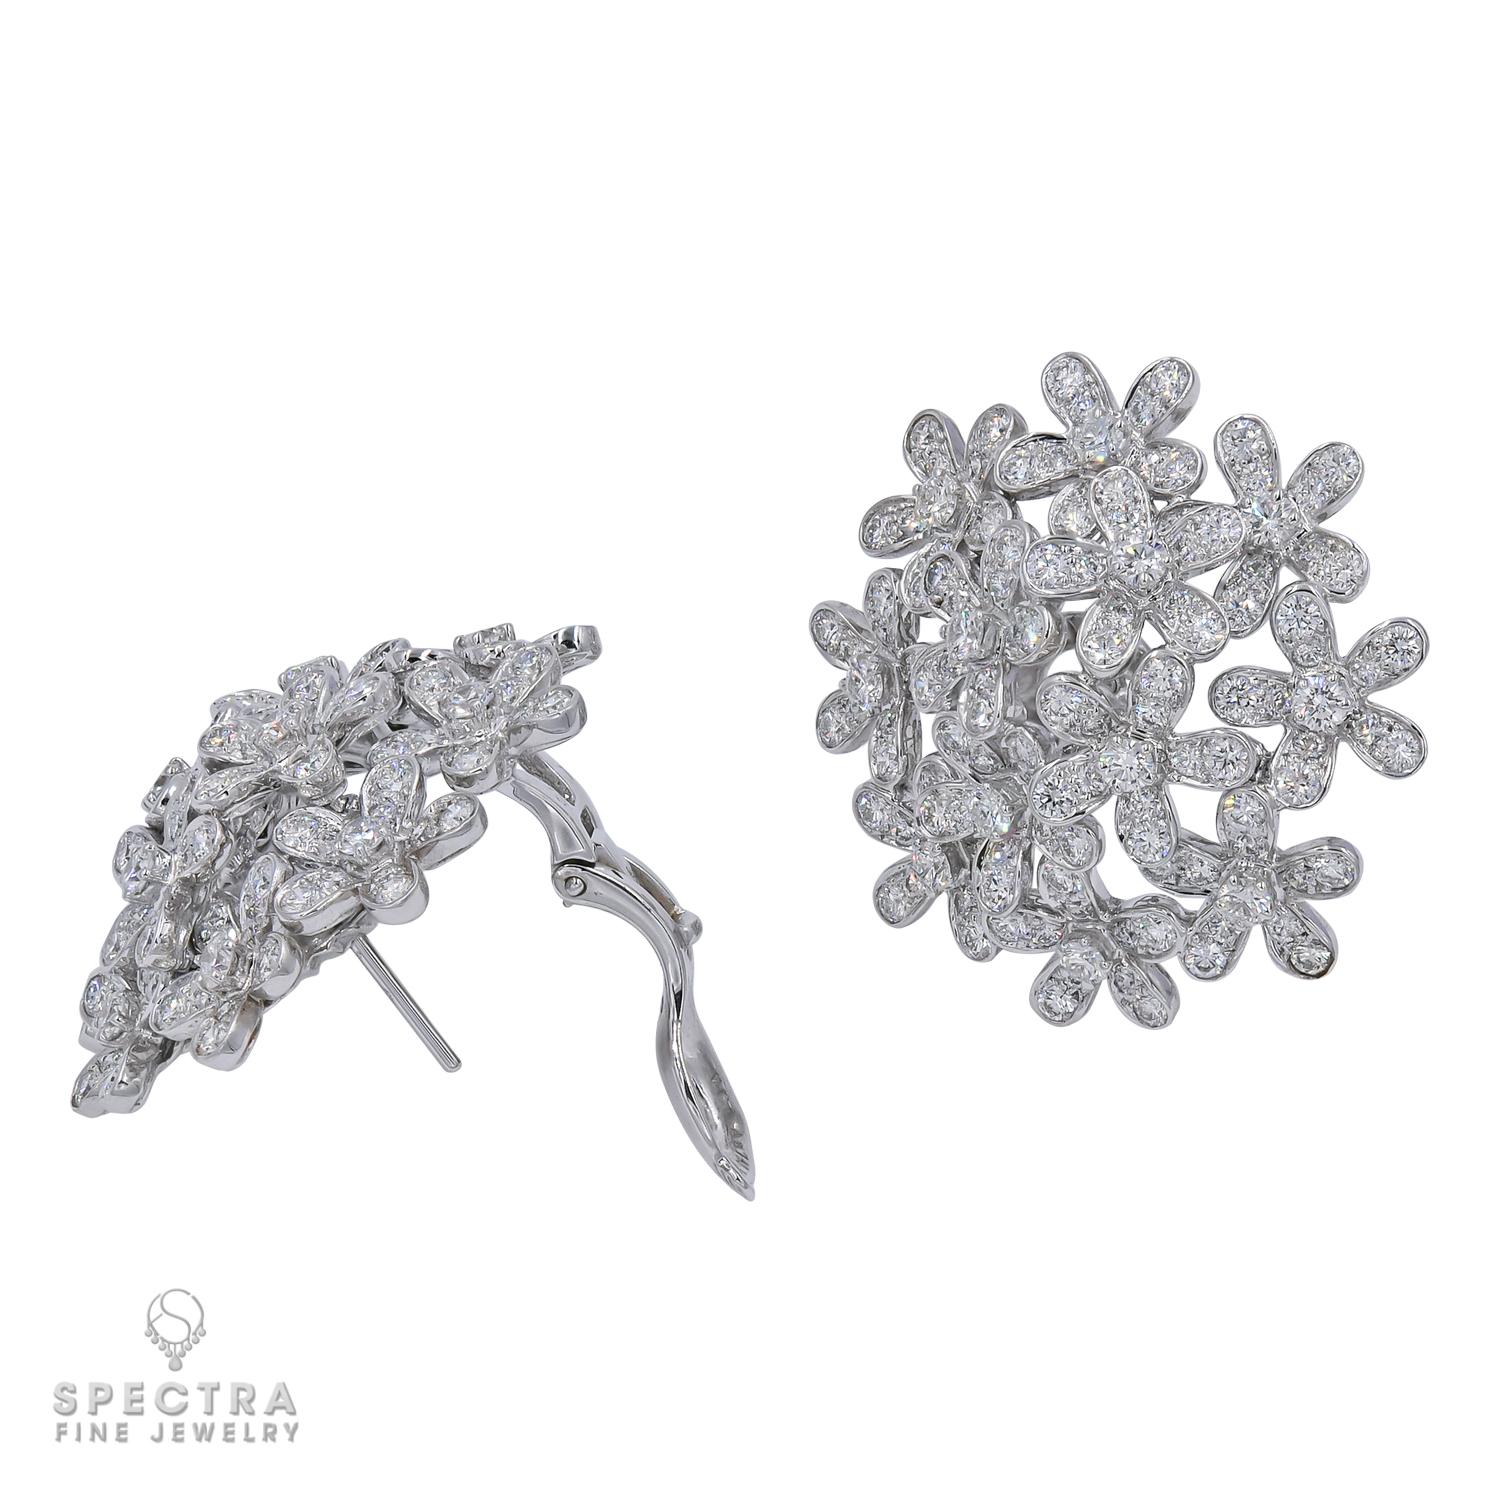 This striking Van Cleef & Arpels pair of pierced earrings with French clips from the celebrated Socrate™ jewelry collection feature a delicate floral motif crafted in 18K white gold and set with approximately 265 brilliant-cut round diamonds